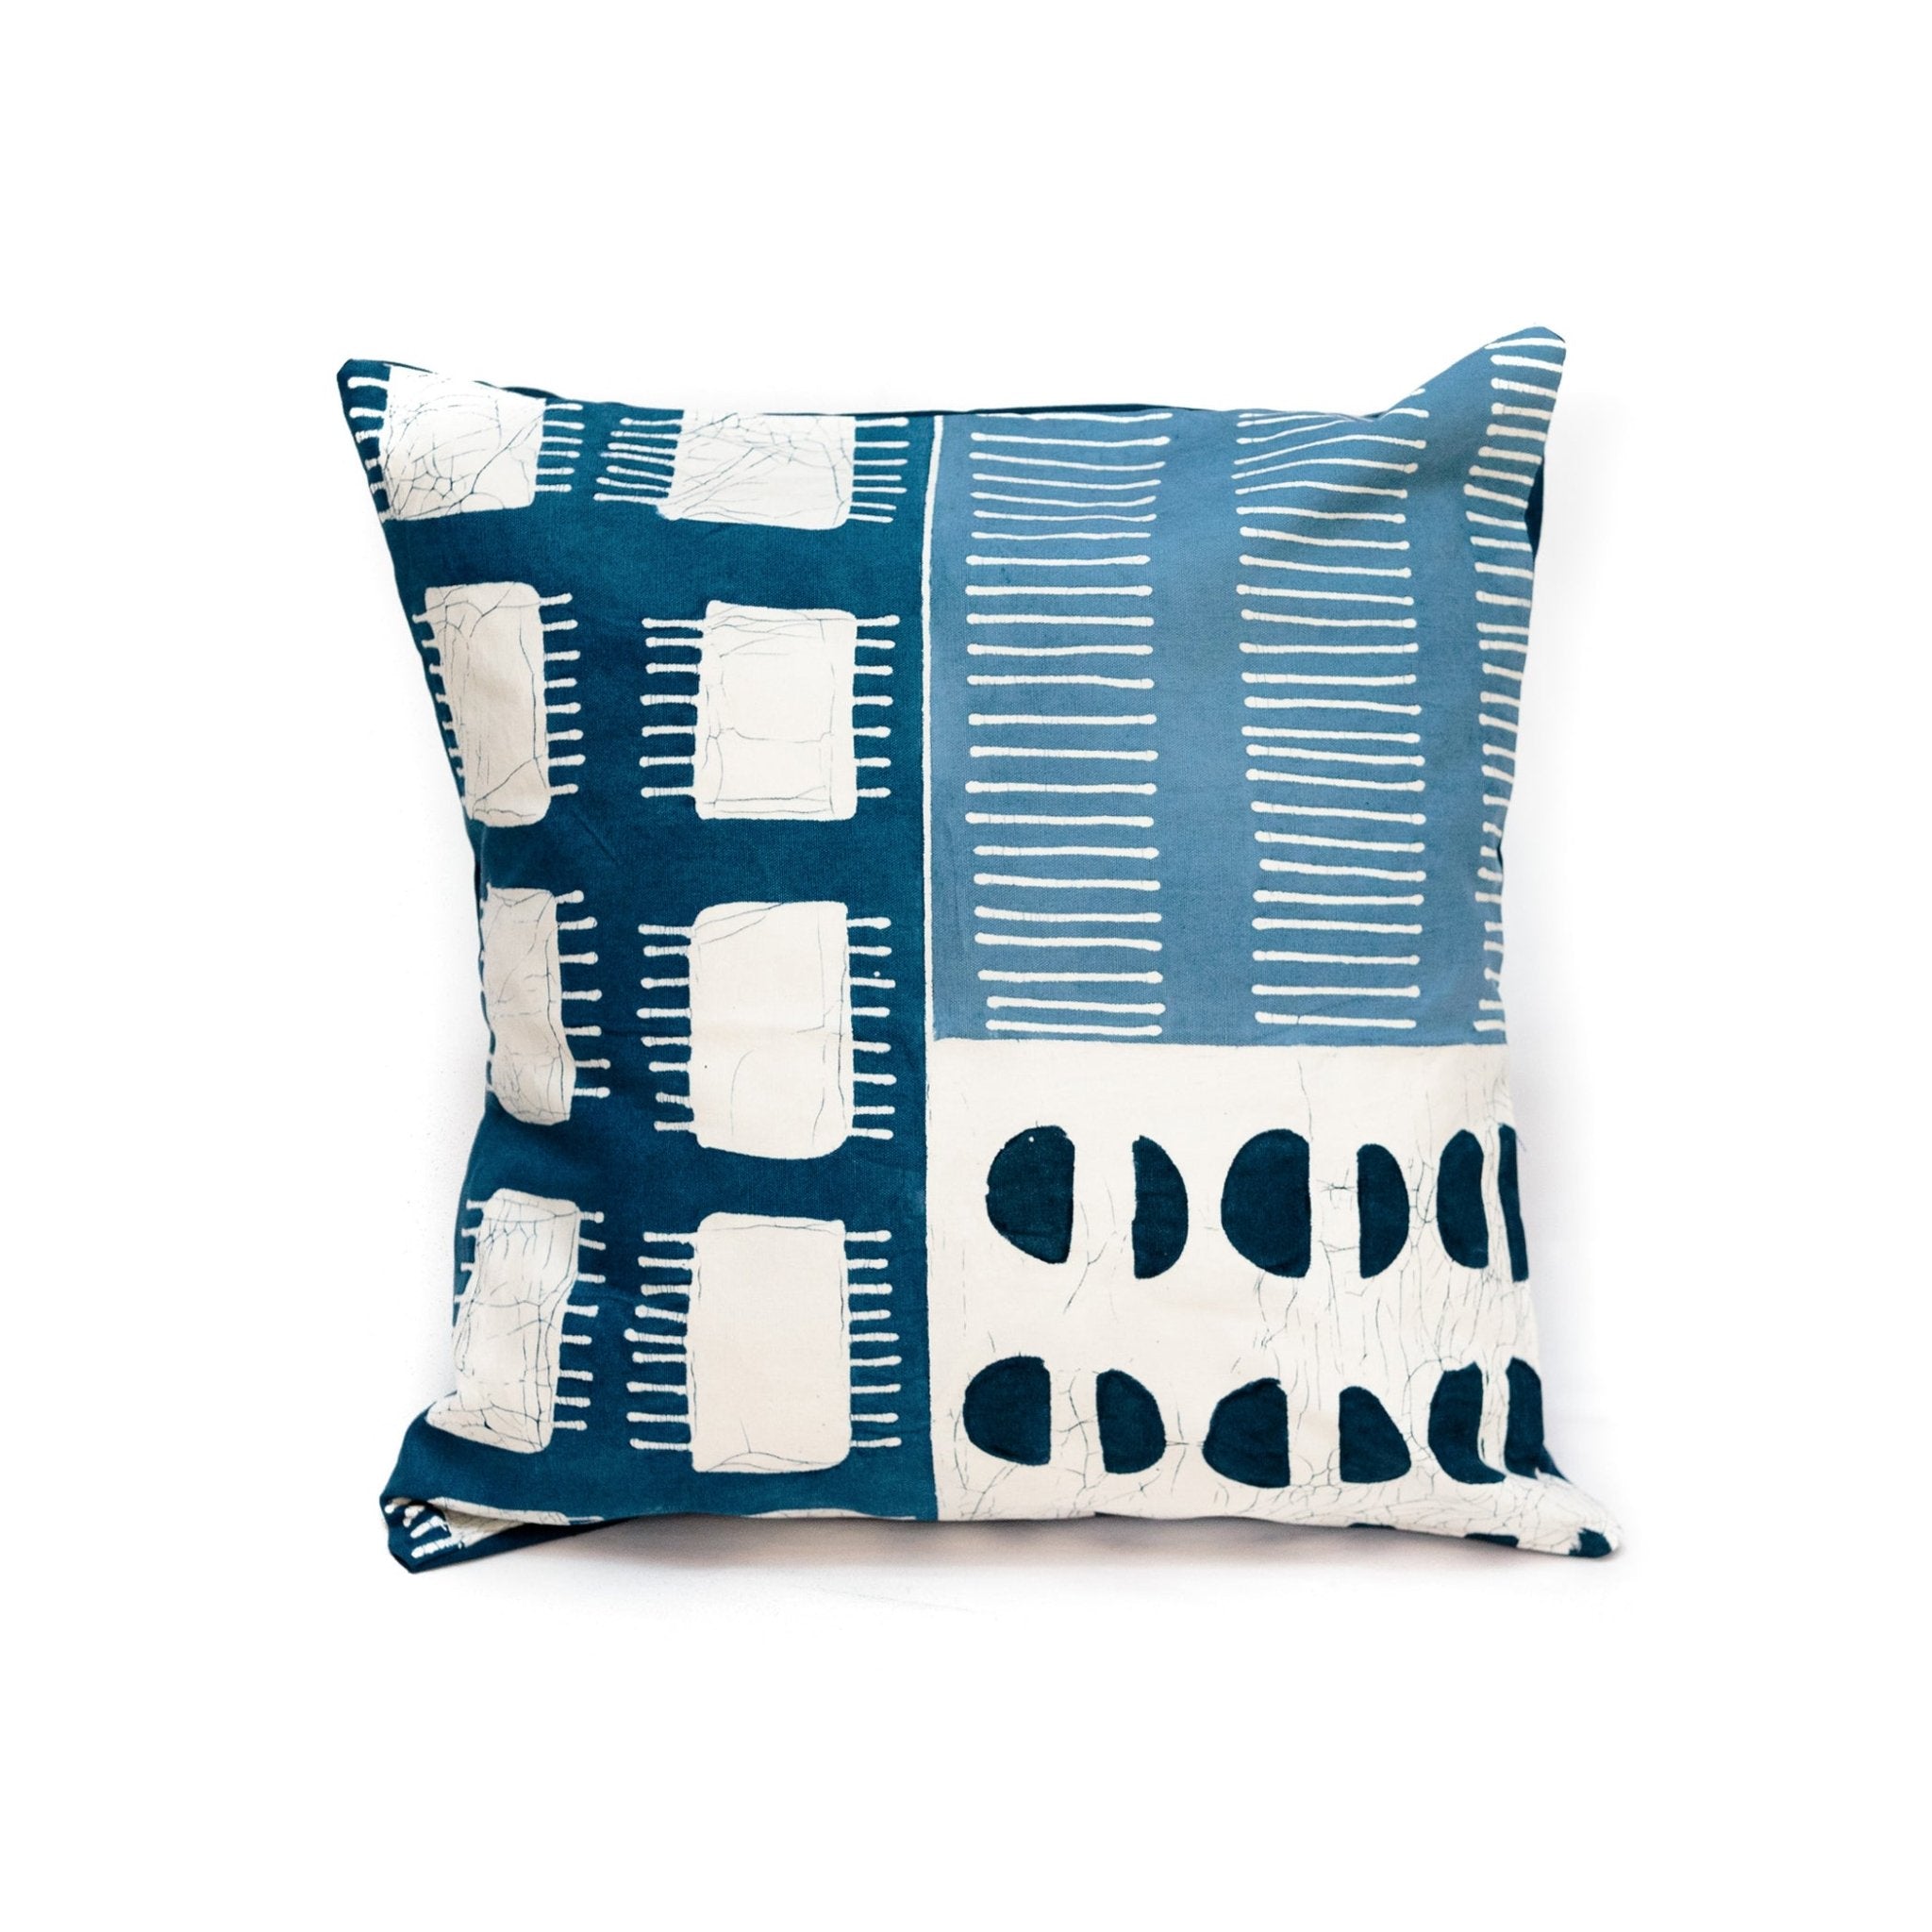 Bohemian chic patchwork pillow, made in Africa from 100% cotton with a mix of whites and blues.